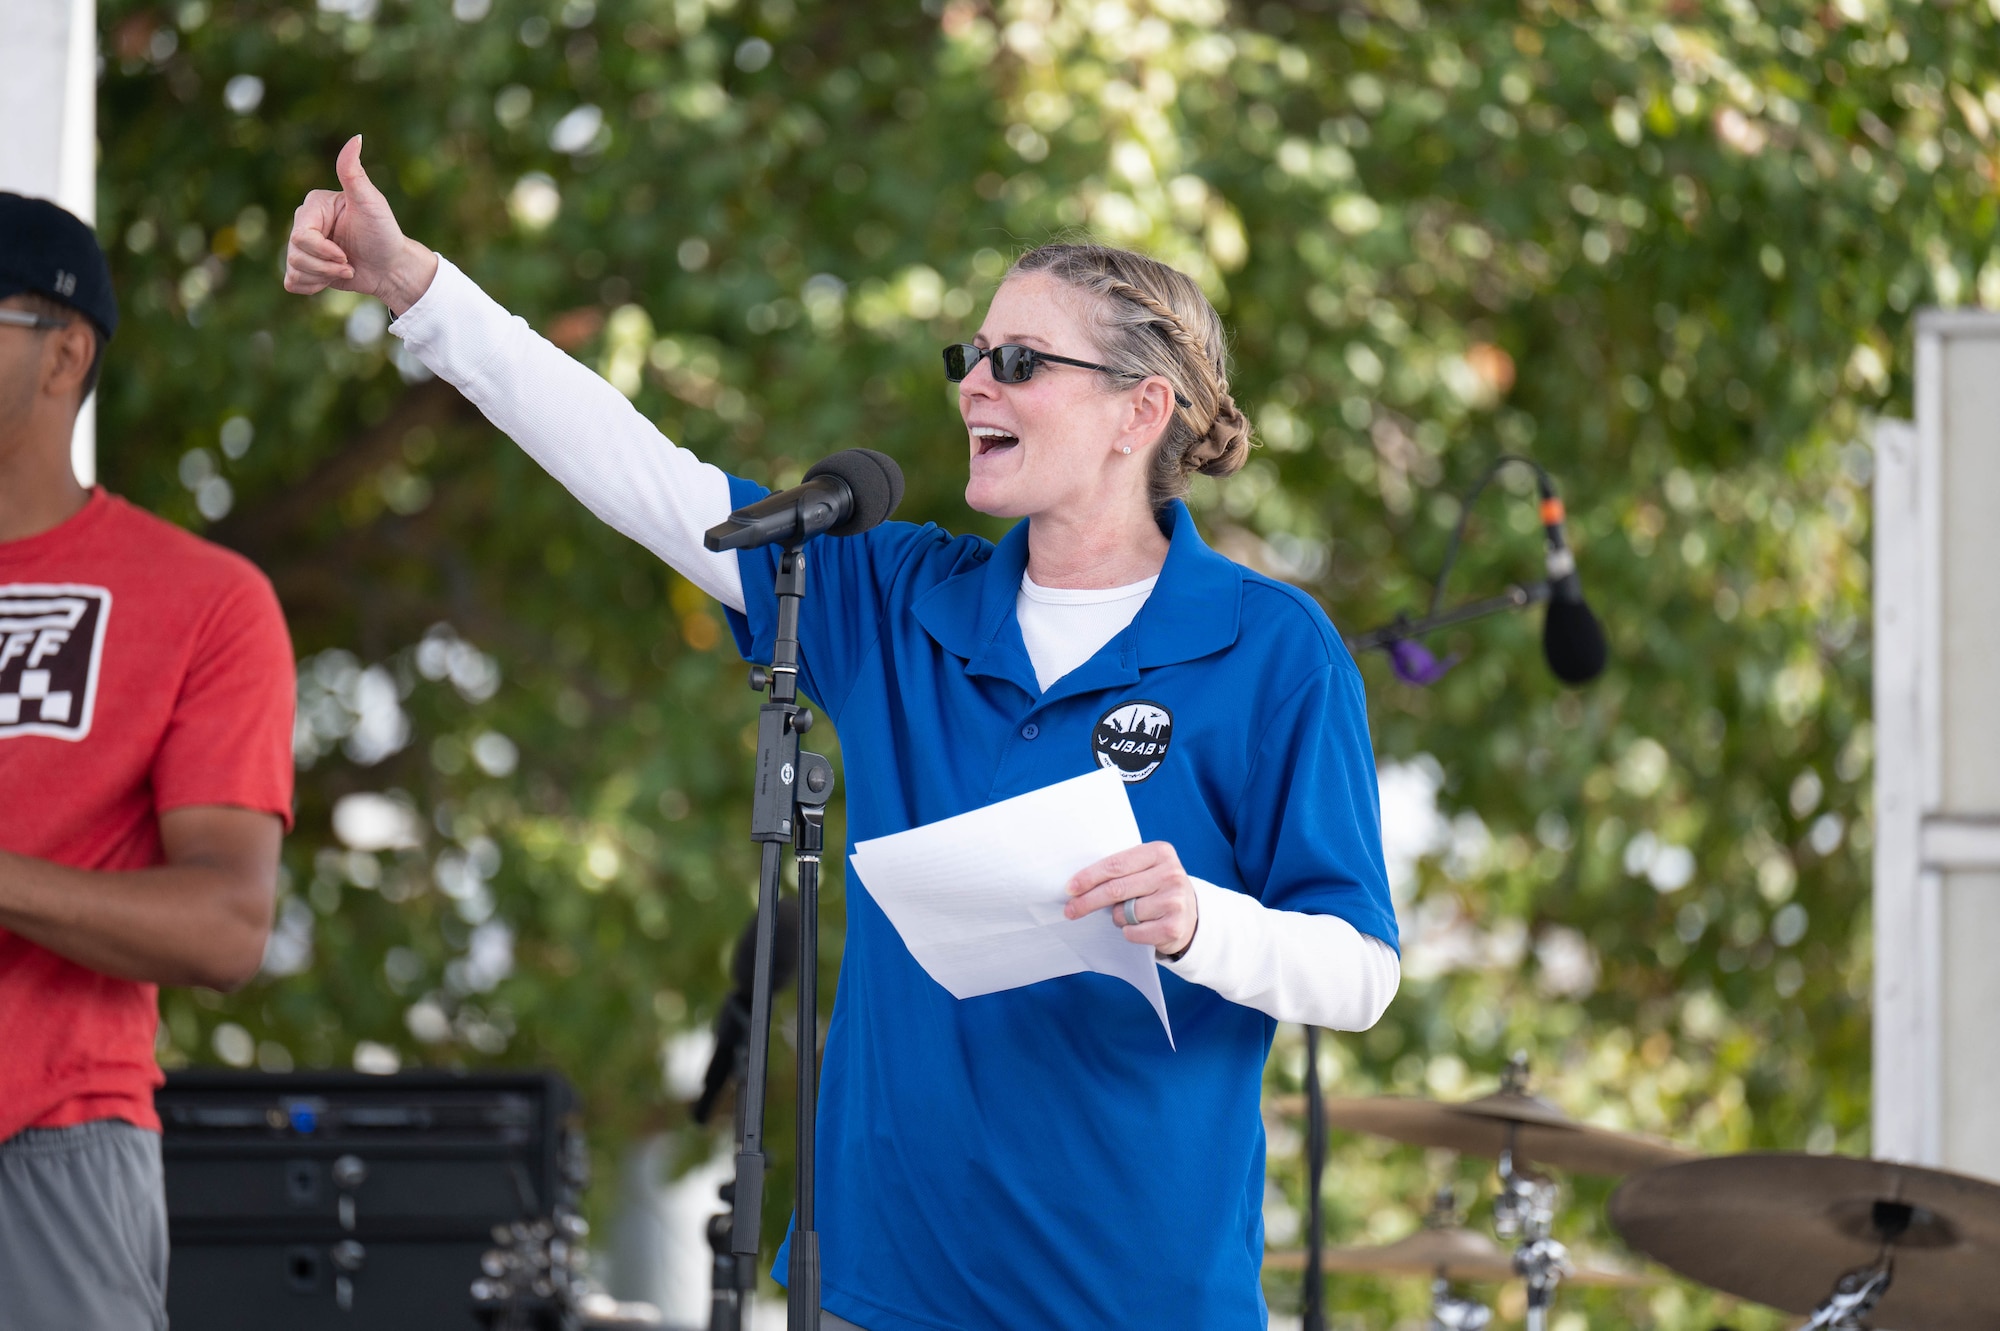 U.S. Air Force Col. Catherine "Cat" Logan, commander of Joint Base Anacostia-Bolling and the 11th Wing, provides the opening remarks at the Sentinels Celebration, Joint Base Anacostia-Bolling, Washington, D.C., Oct. 12, 2022. The Sentinels Celebration was held in honor of the base reaching Full Operational Capability after the first-ever Department of Defense lead service transfer in 2020. (U.S. Air Force photo by Kristen Wong)